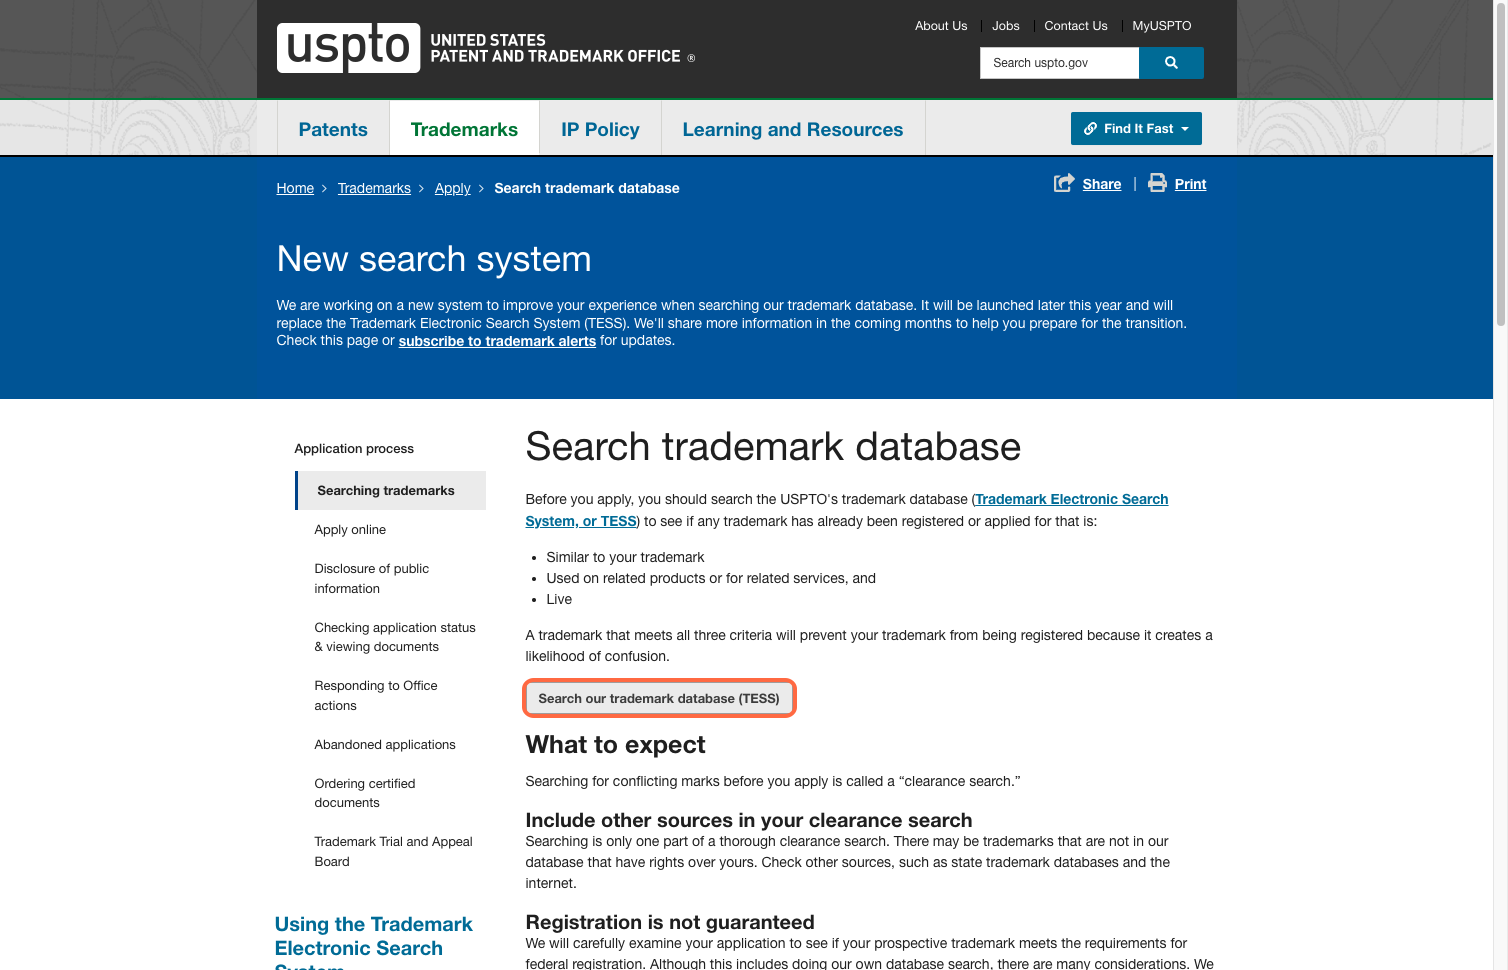 Click on Search our trademark database (TESS)